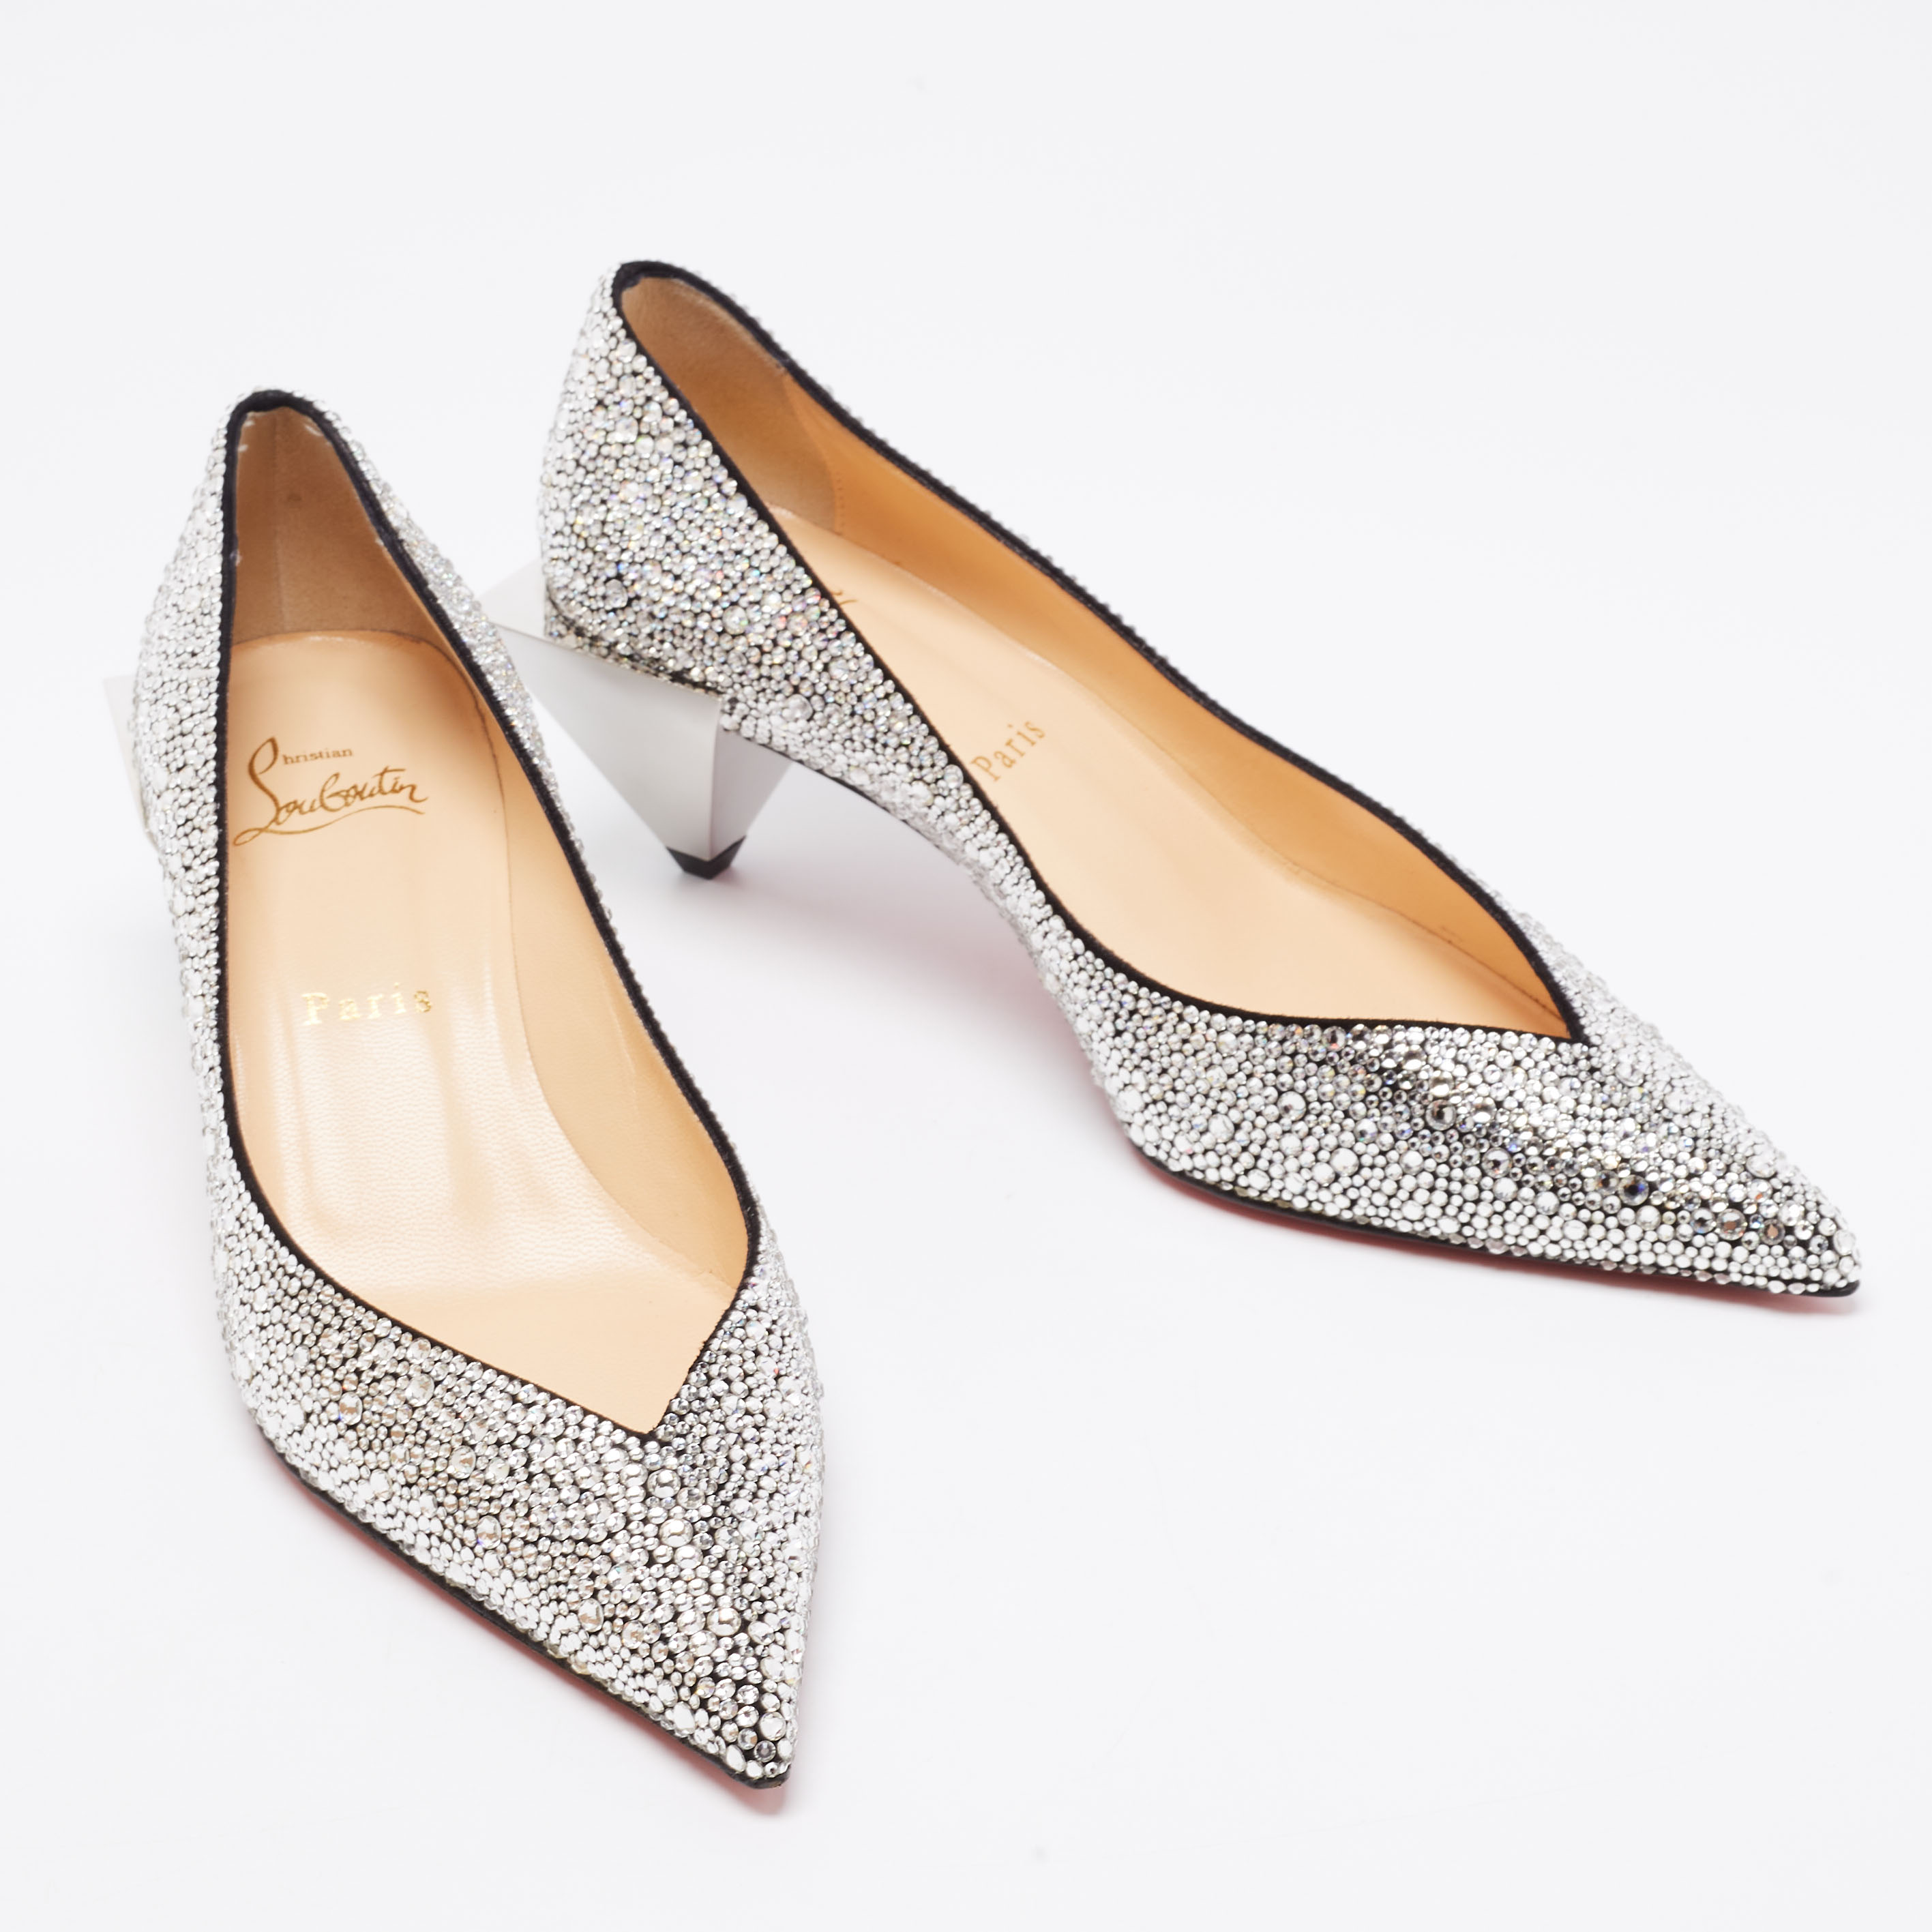 Christian Louboutin Silver Suede Galaxister Strass Pumps Size 37